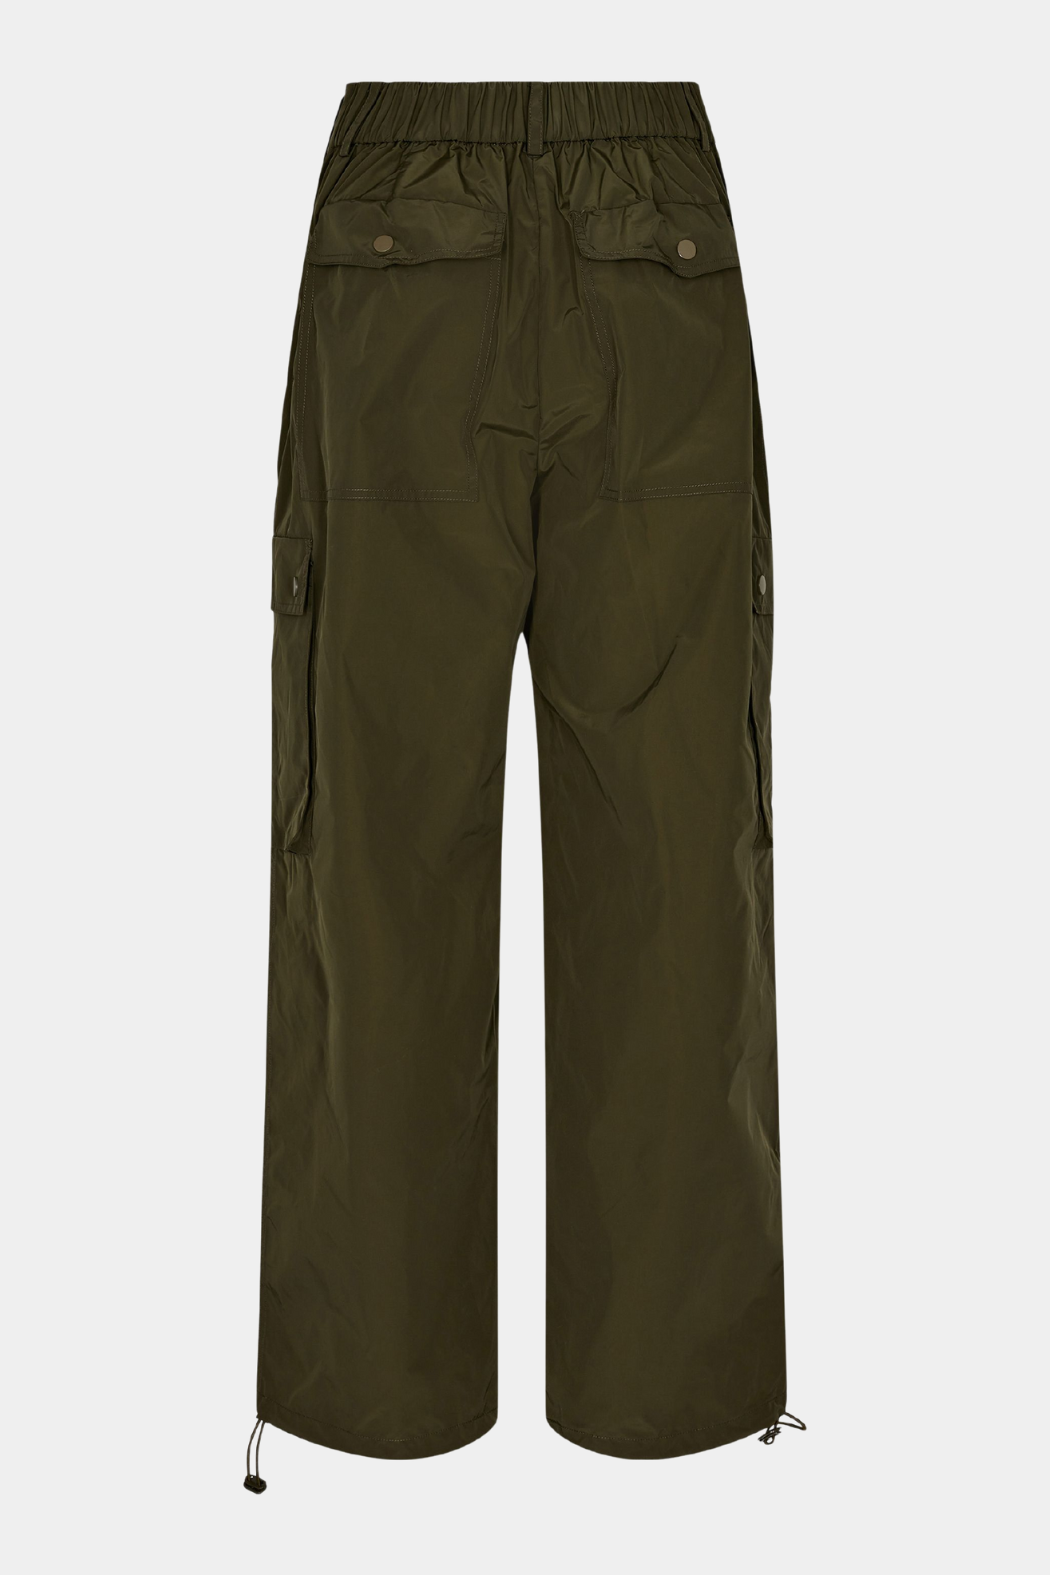 S231314 Trousers, army green